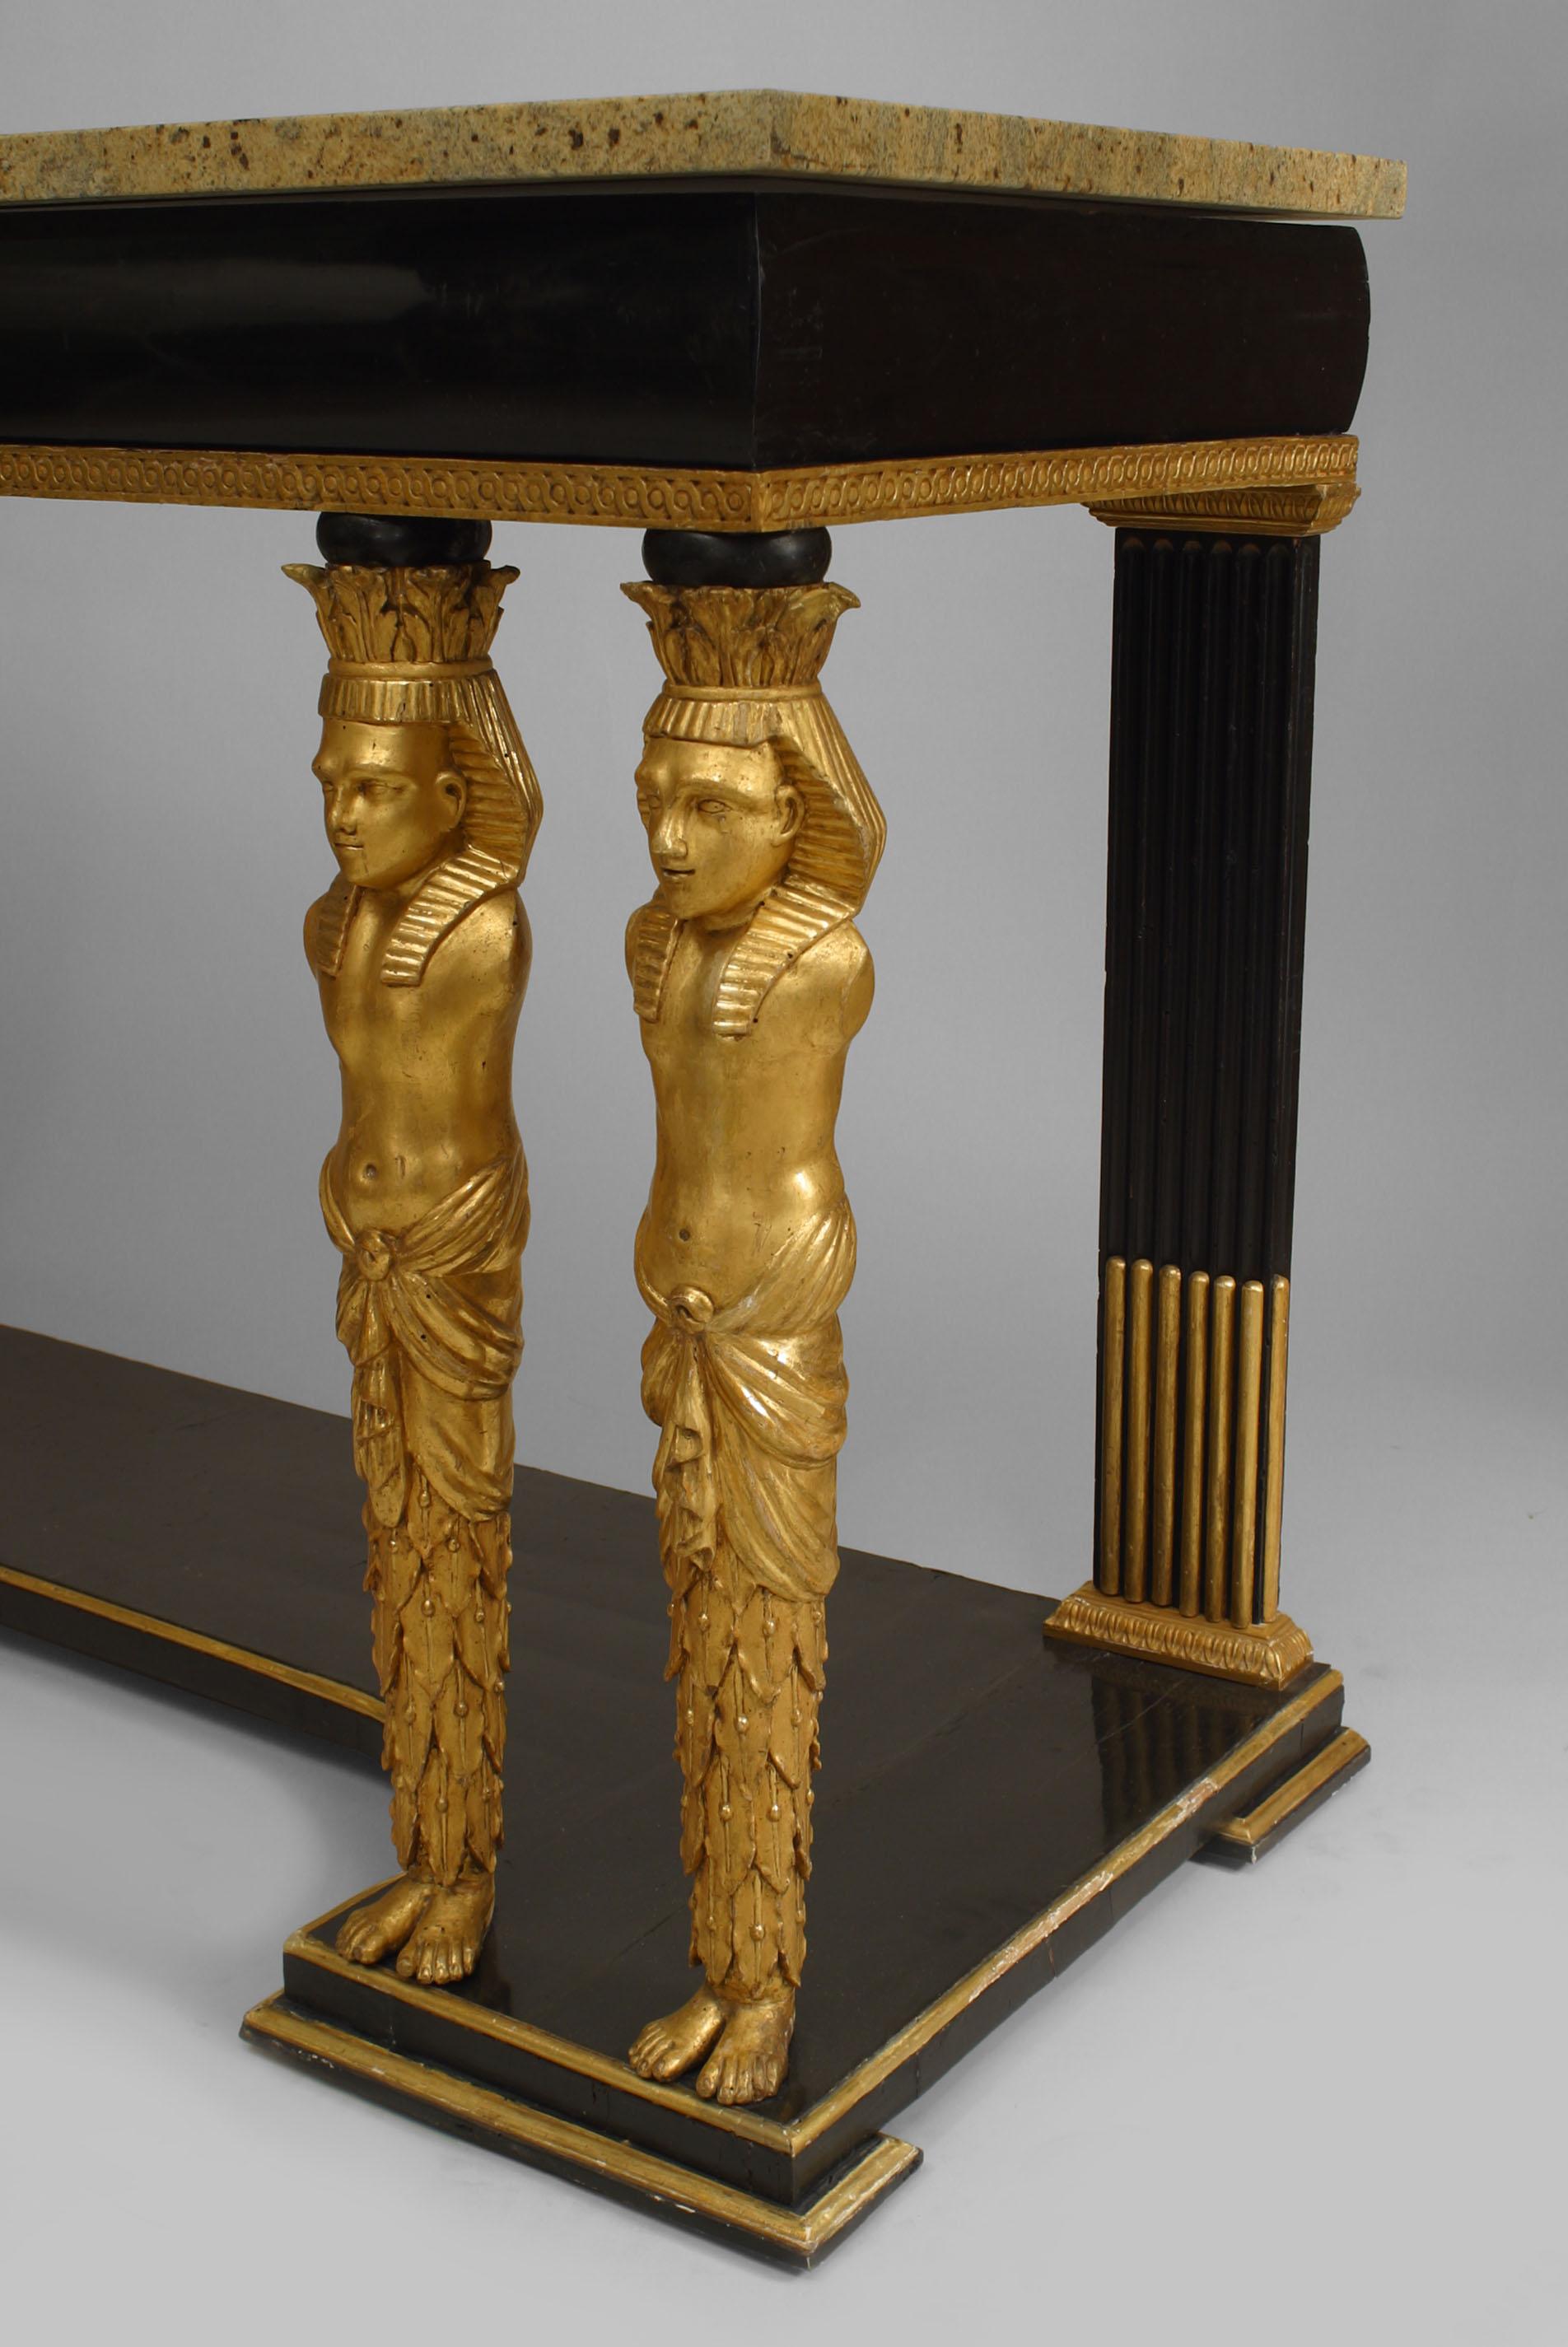 Continental Austrian Empire-style (circa 1800) ebonized & gilt trimmed console table with 4 gilt carved classical Egyptian figural front supports on a platform base with a marble top.
